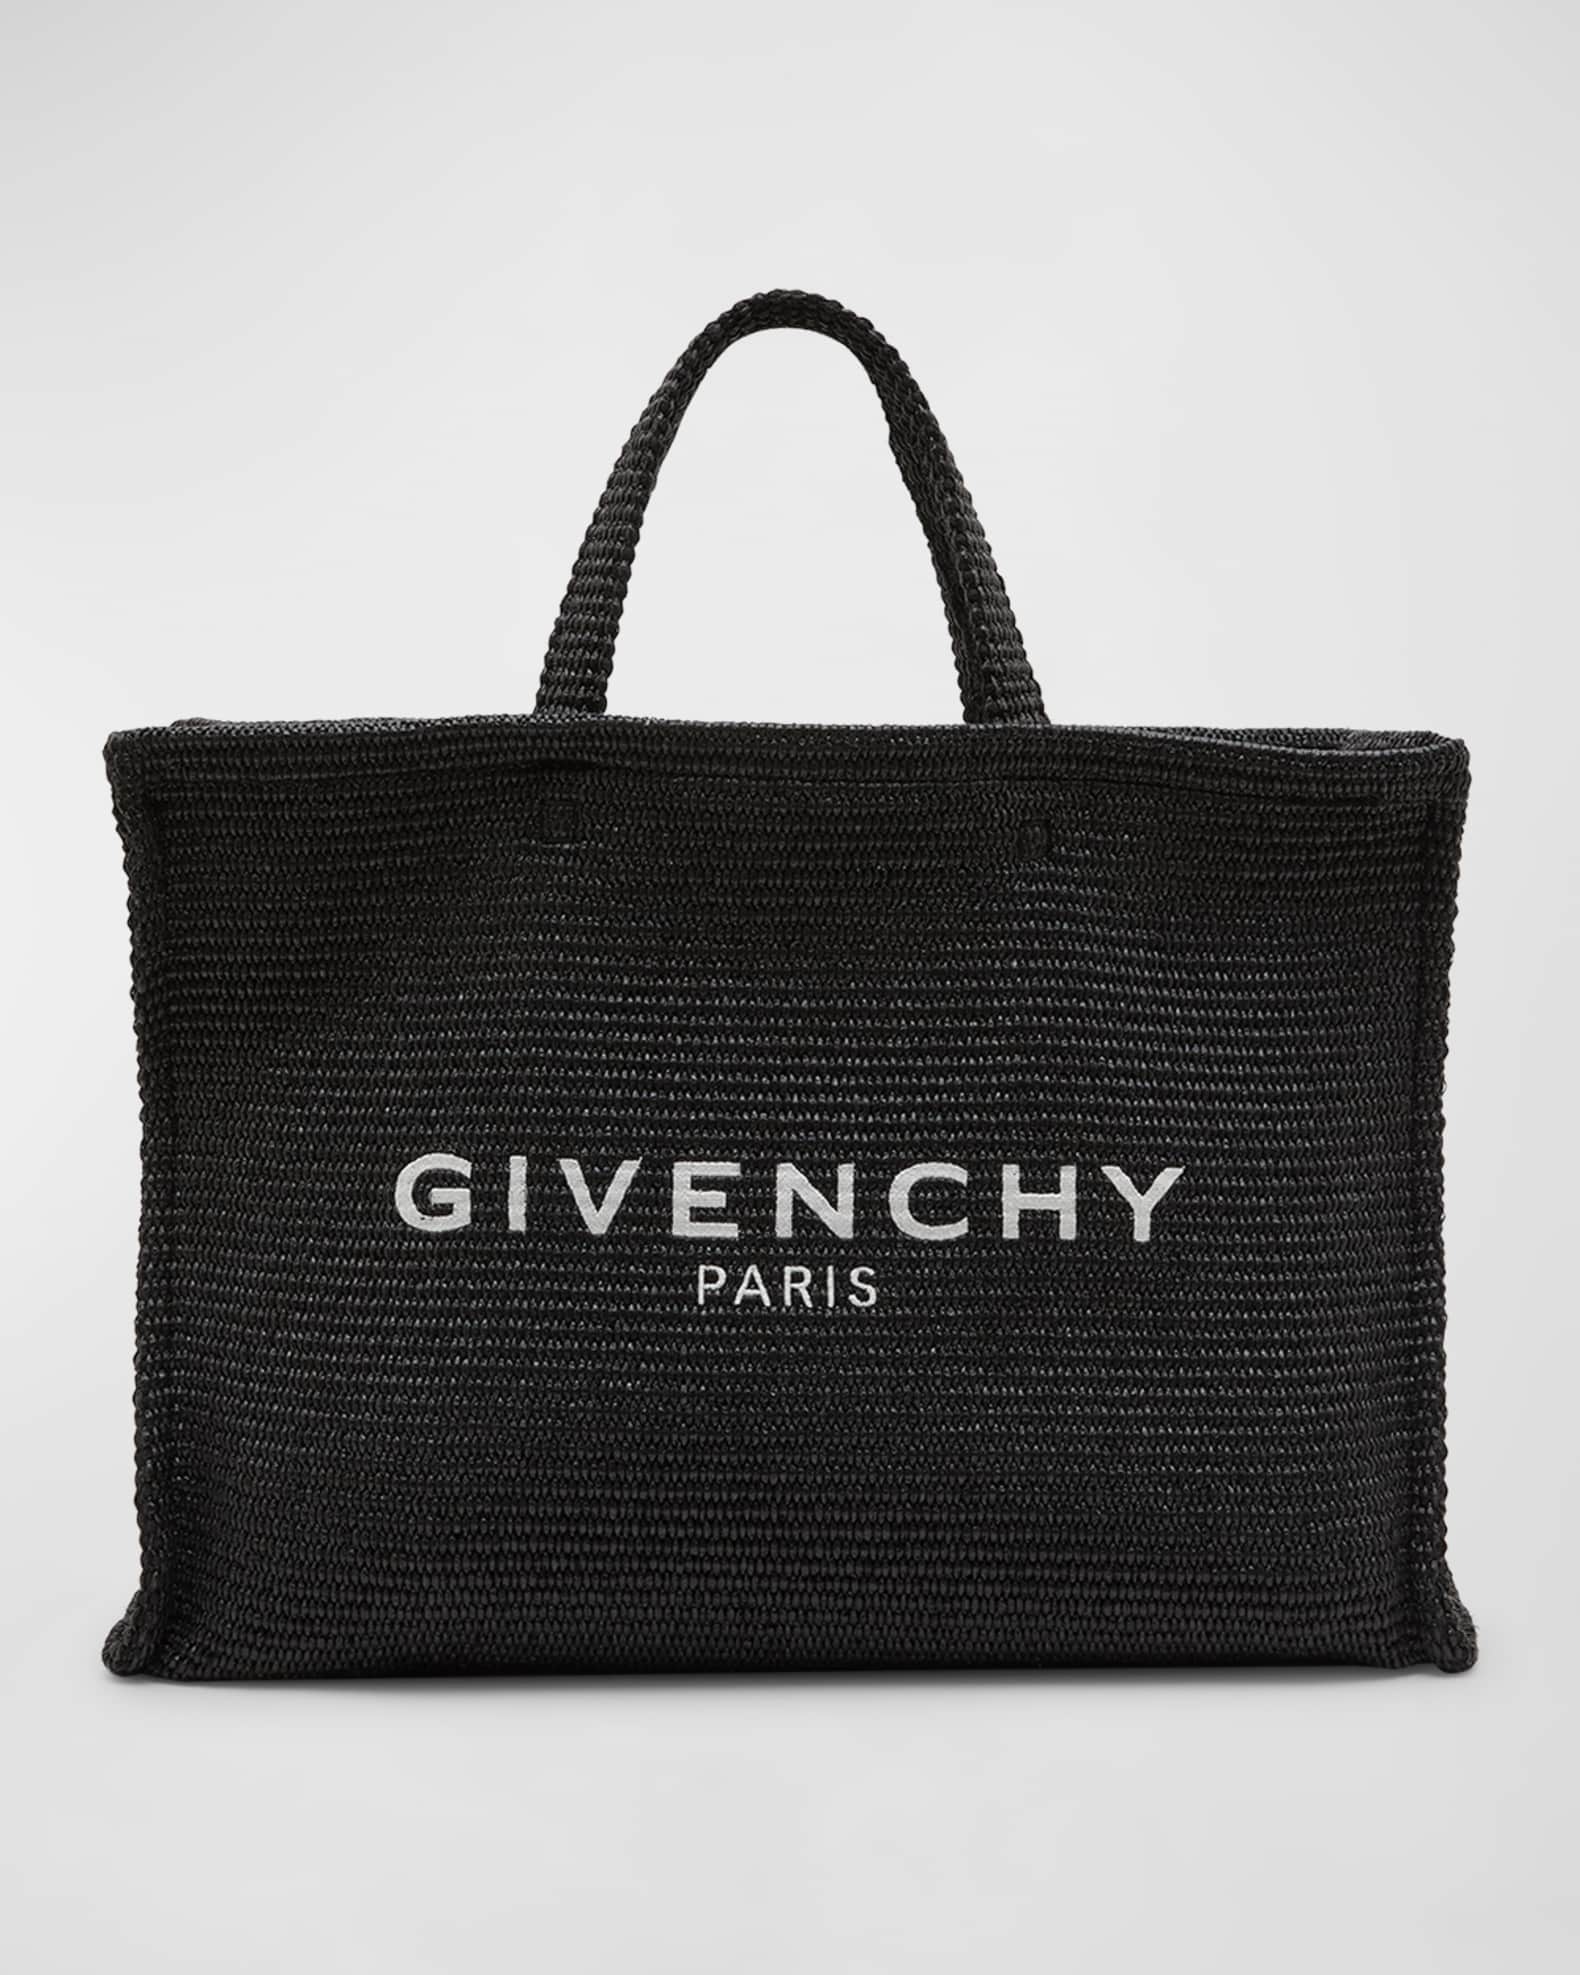 Givenchy Women's Large G Tote Shopping Bag in Raffia - Black